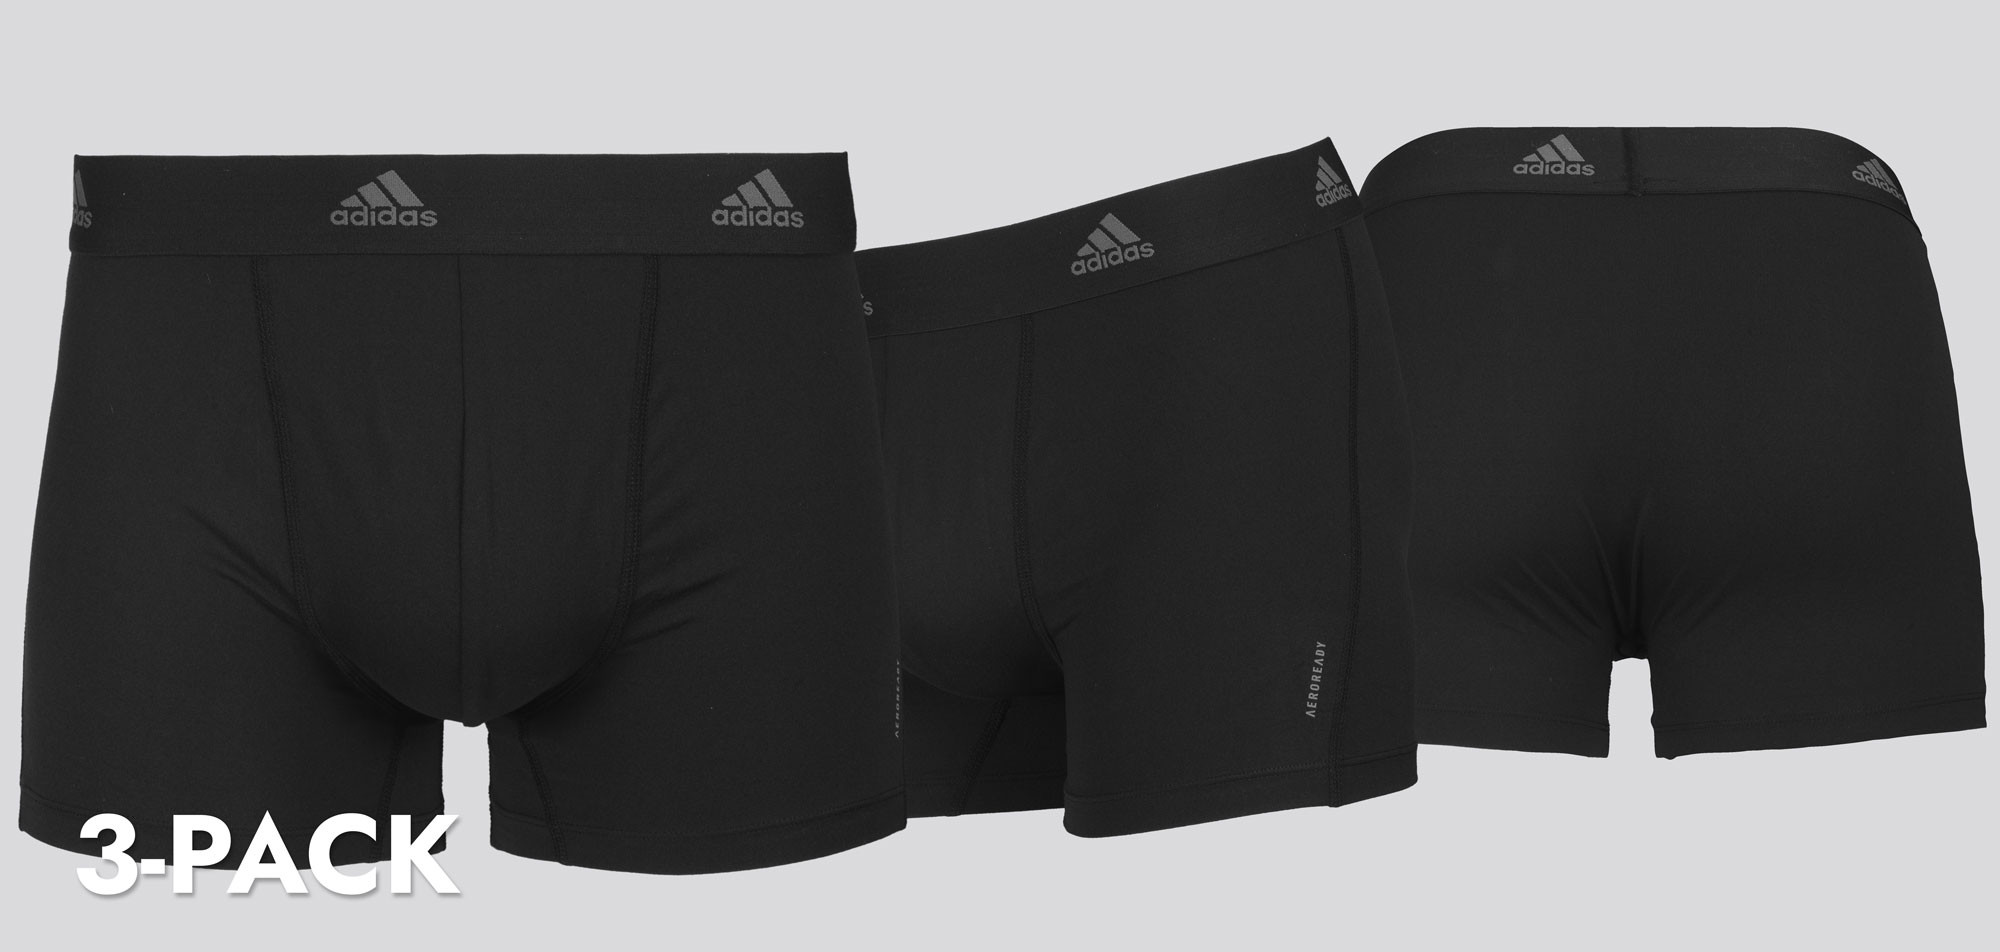 Adidas Trunk 3-Pack 4A3M02 Active Micro Flex Eco